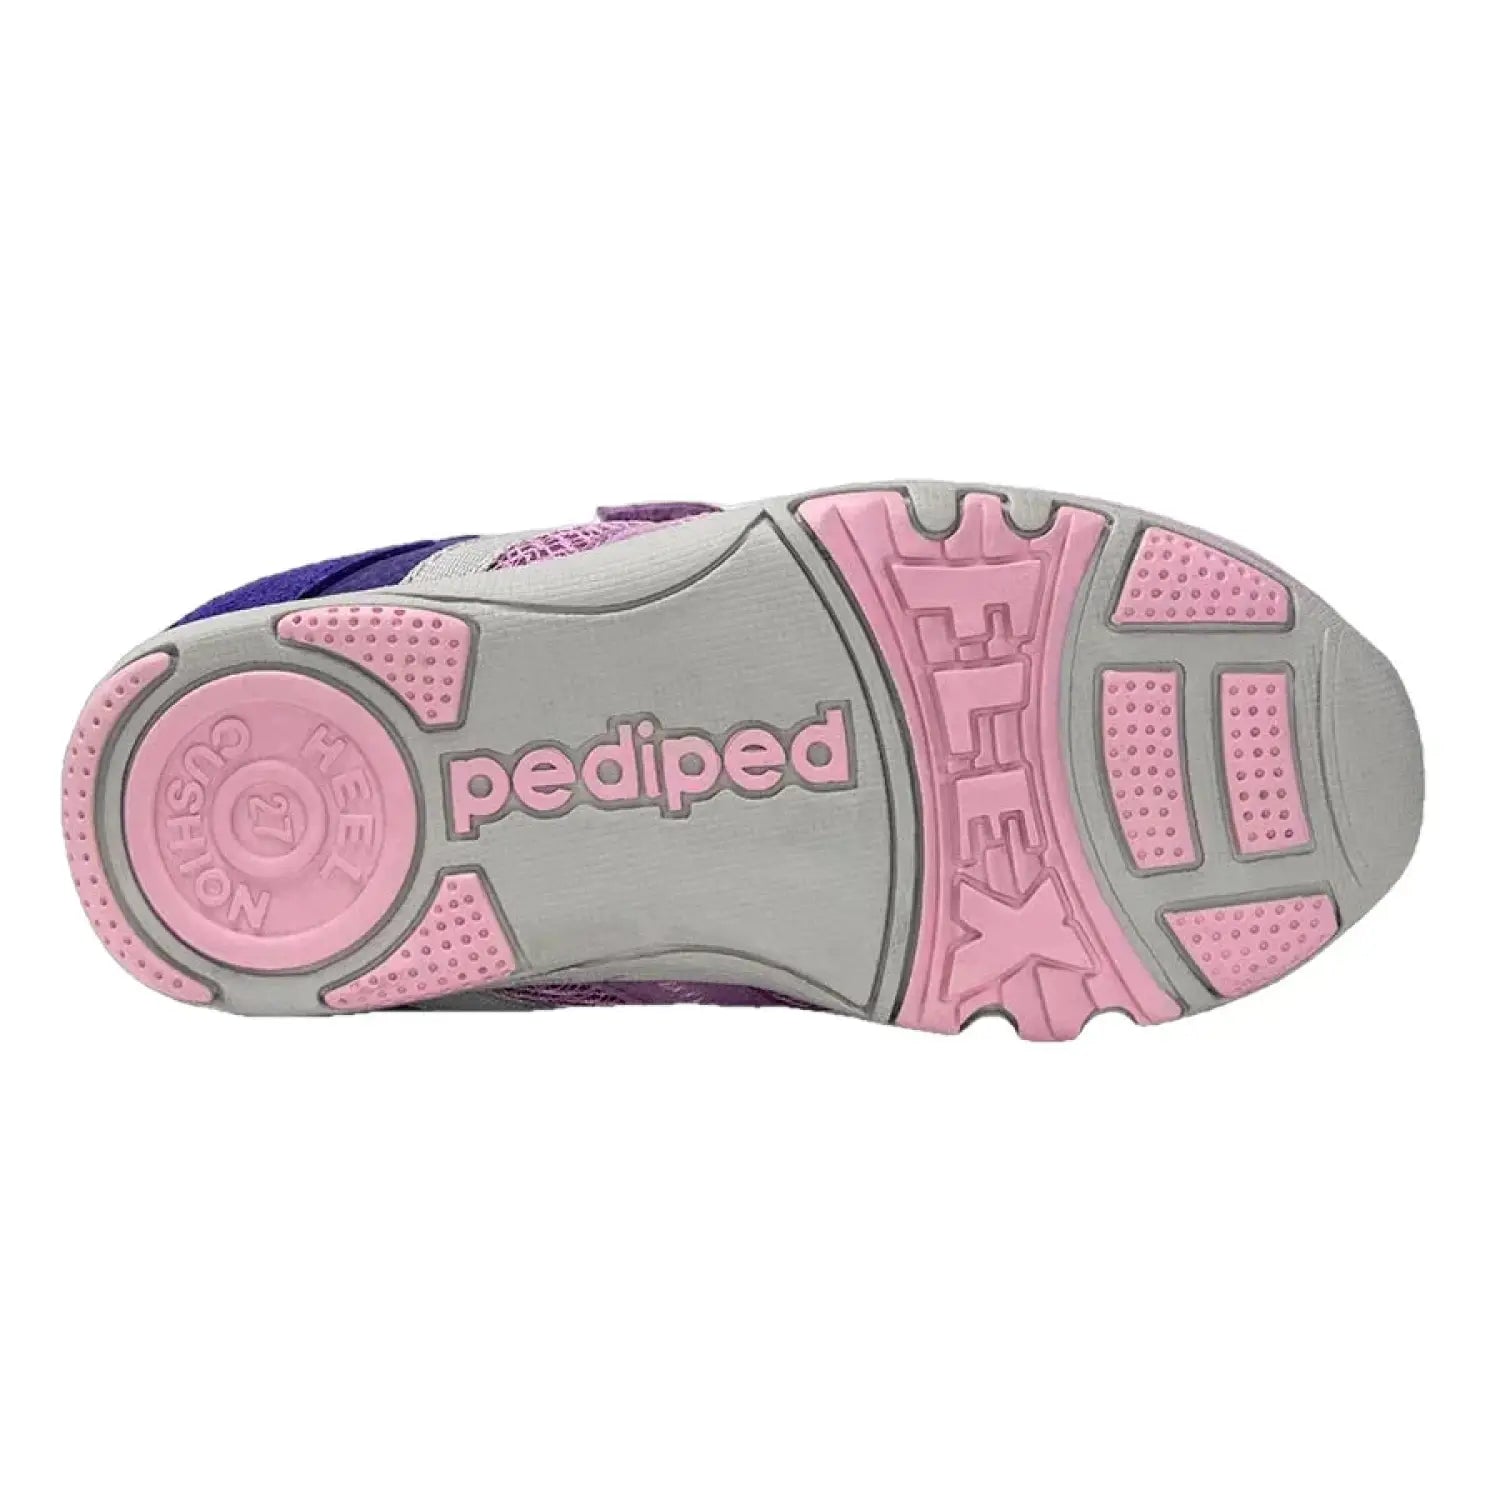 Pediped Flex® Gehrig Kids Shoes shown in Viola - sole view. Pink and silver accent colors. 